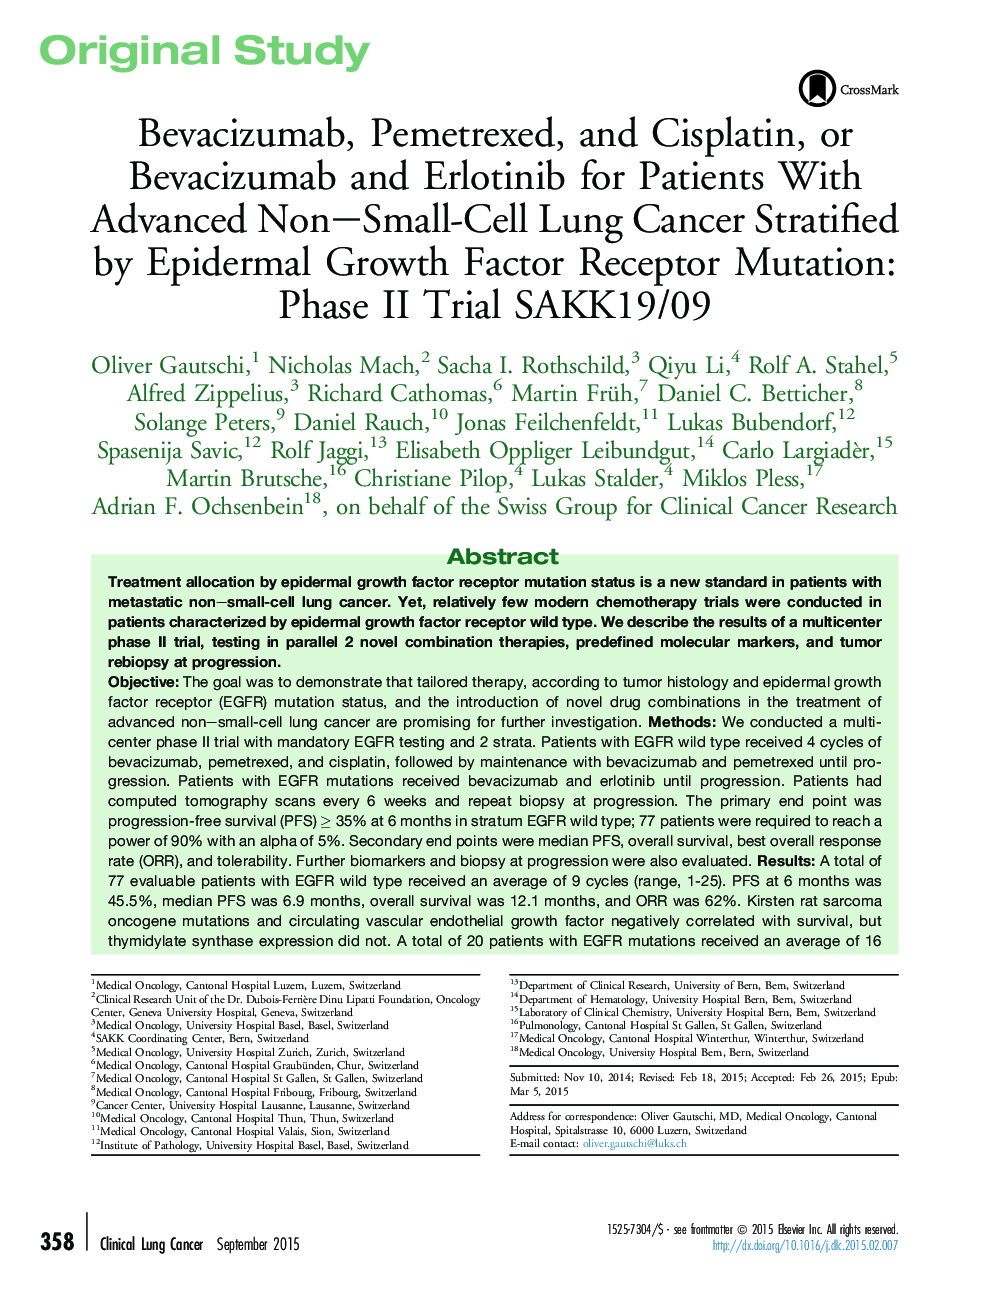 Bevacizumab, Pemetrexed, and Cisplatin, or Bevacizumab and Erlotinib for Patients With Advanced Non–Small-Cell Lung Cancer Stratified by Epidermal Growth Factor Receptor Mutation: Phase II Trial SAKK19/09